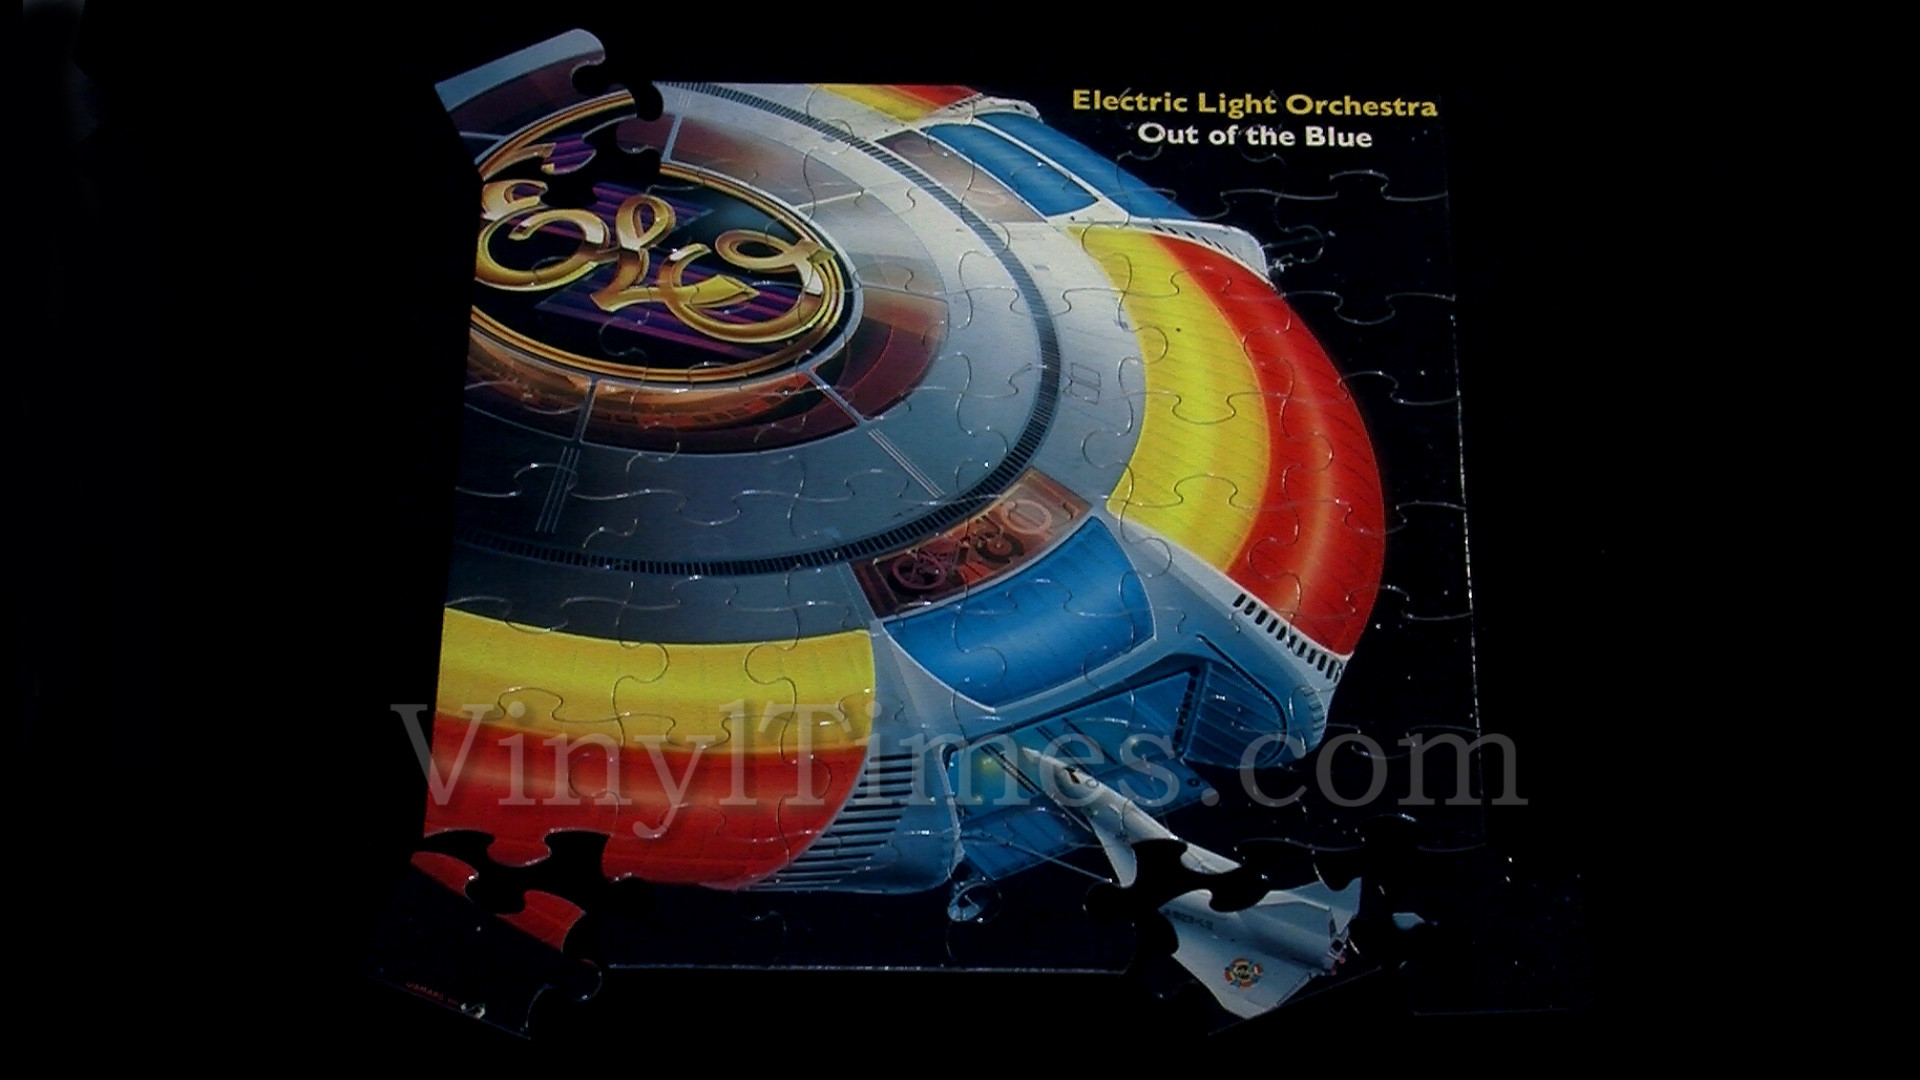 Blue light orchestra. Electric Light Orchestra out of the Blue 1977. Elo out of the Blue 1977. Electric Light Orchestra катушки. Electric Light Orchestra out of the Blue LP.